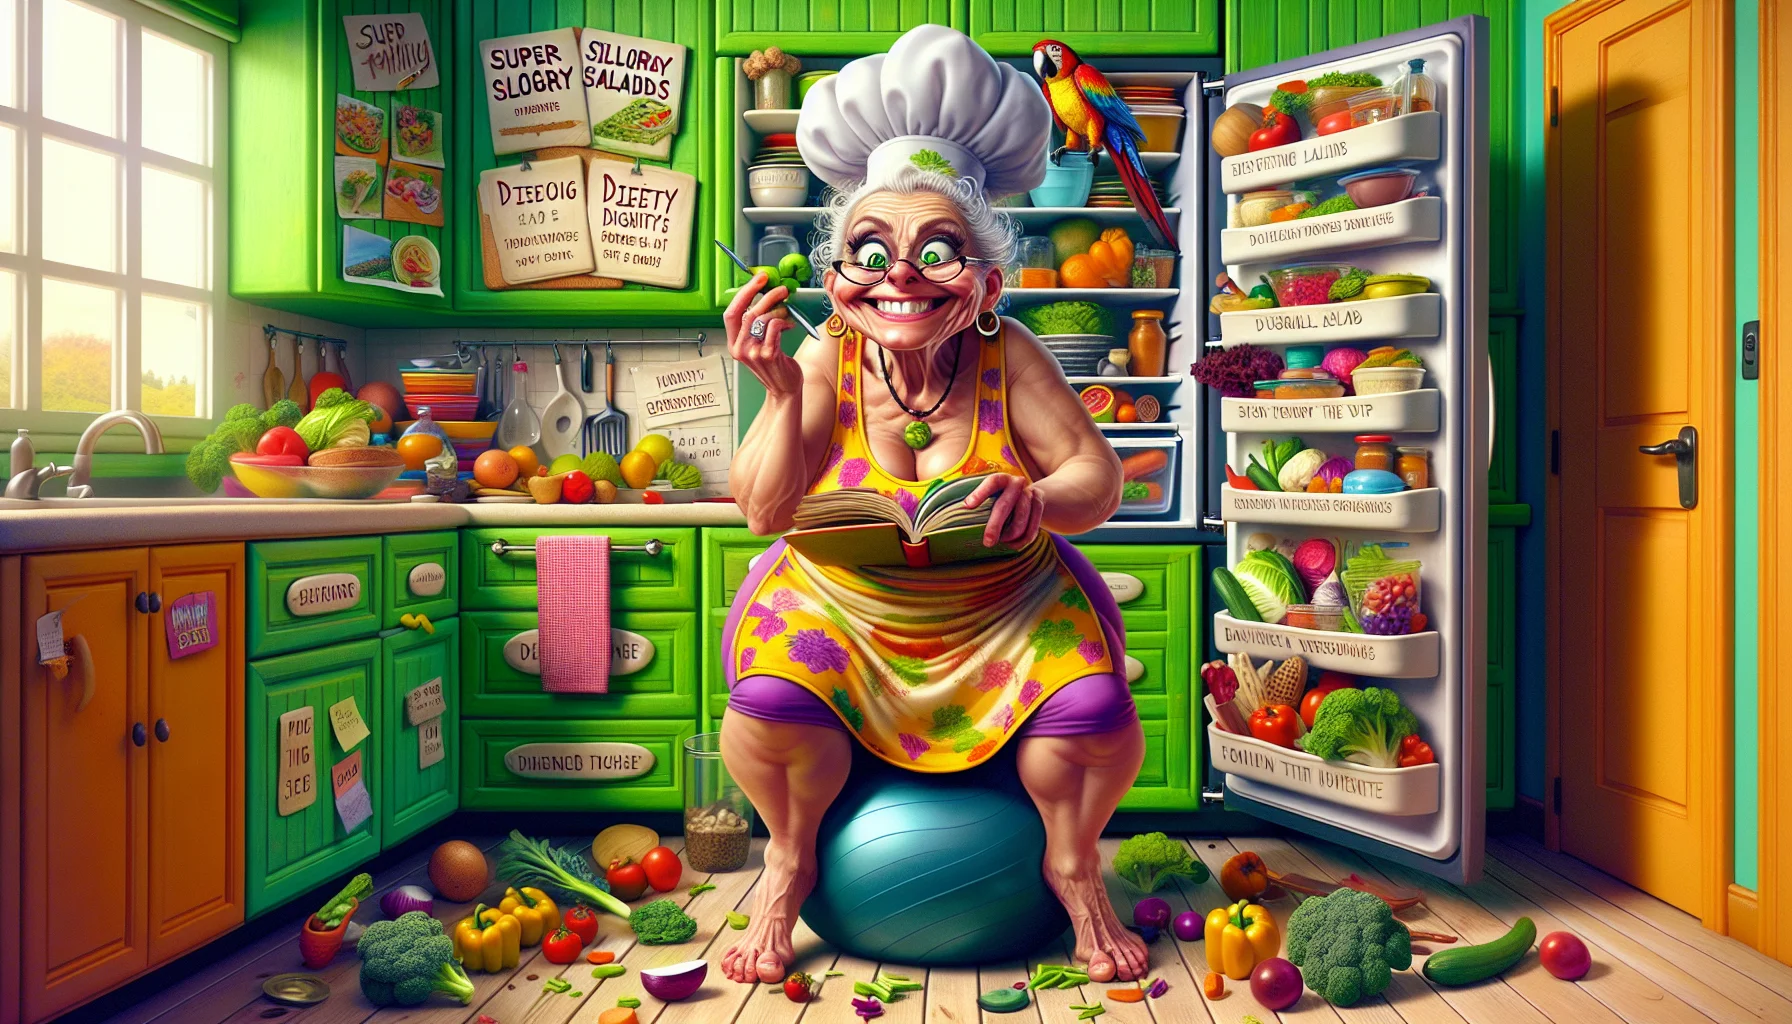 A humorous scene of an older Caucasian woman, with a playful spark in her eyes, in a vividly colored kitchen. Kitted out in an exaggerated chef's hat and apron, she's balancing on a yoga ball while chopping vegetables. Surrounding her are cookbooks with comically large titles like 'Super Solitary Salads' and 'Dieting with Dignity'. The refrigerator is open to reveal overly-organized stacks of healthy food items, each marked with days of the week. In one corner a parrot pecks at a piece of broccoli. The ridiculously overloaded sink, stuffed with dishes, adds to the comedy of the situation.